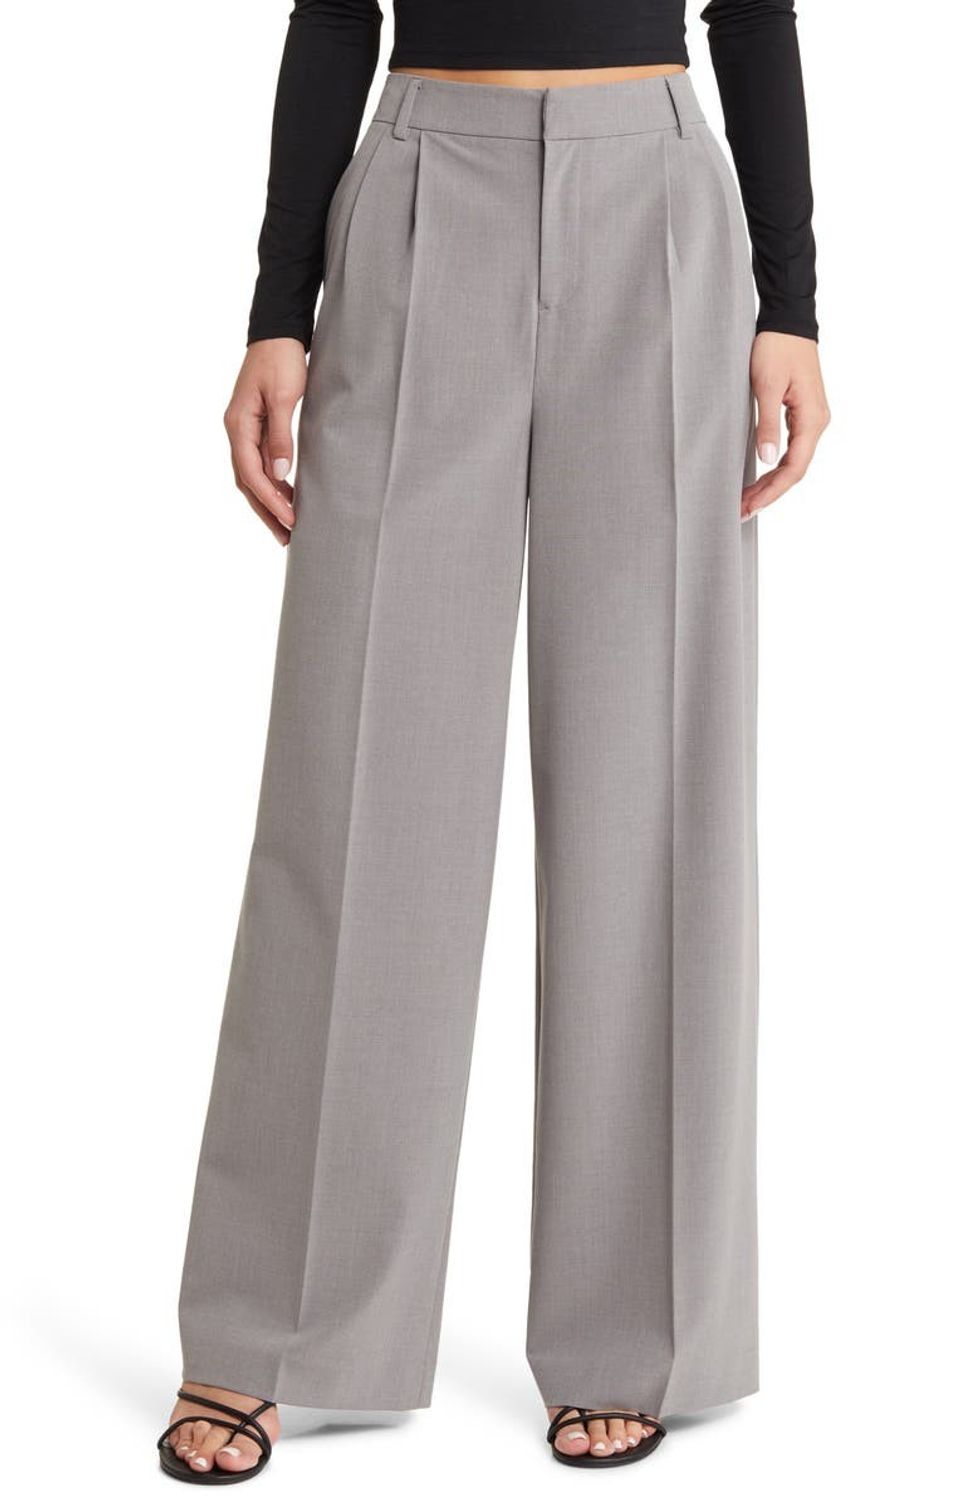 21 Pairs Of Stylish Trousers To Wear To Work - Brit + Co